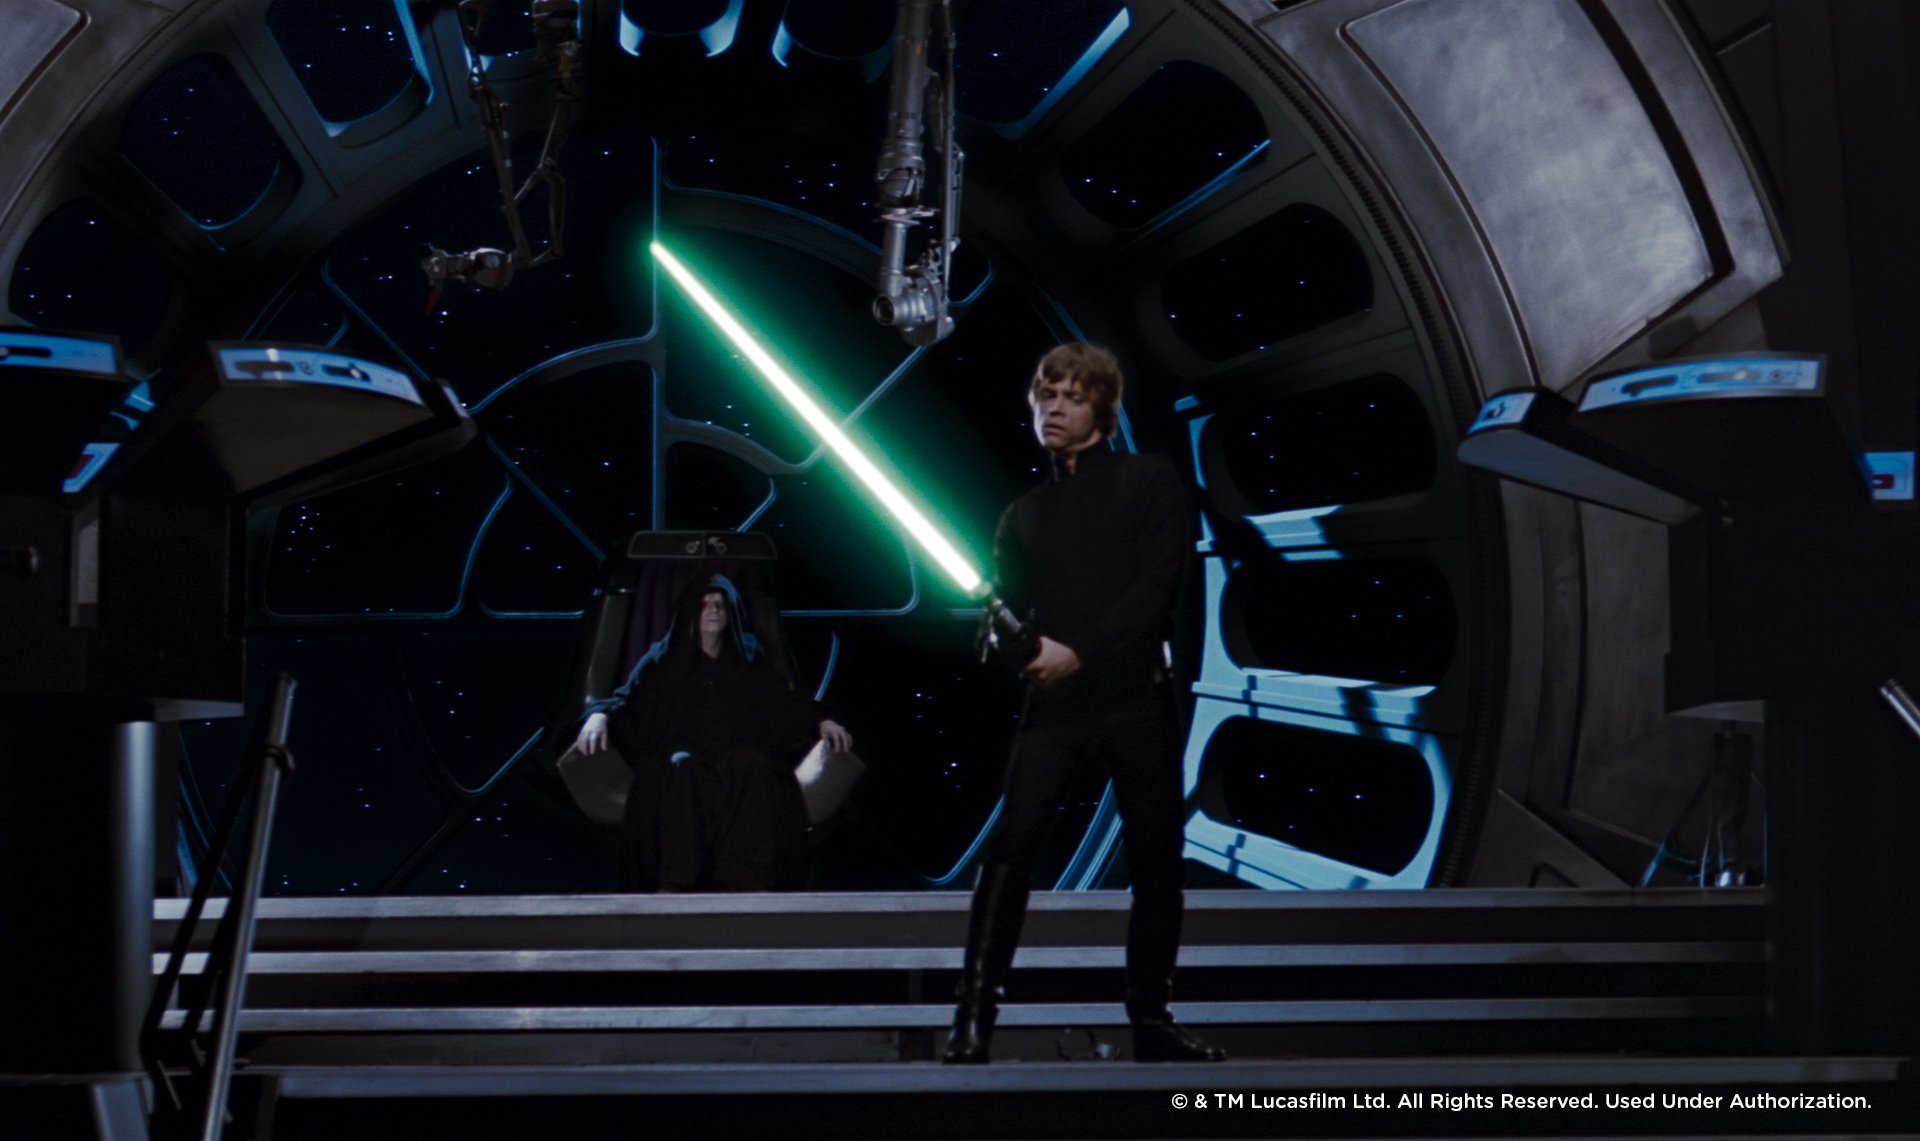 "Star Wars Return of the Jedi" Returns to Theaters for 40th